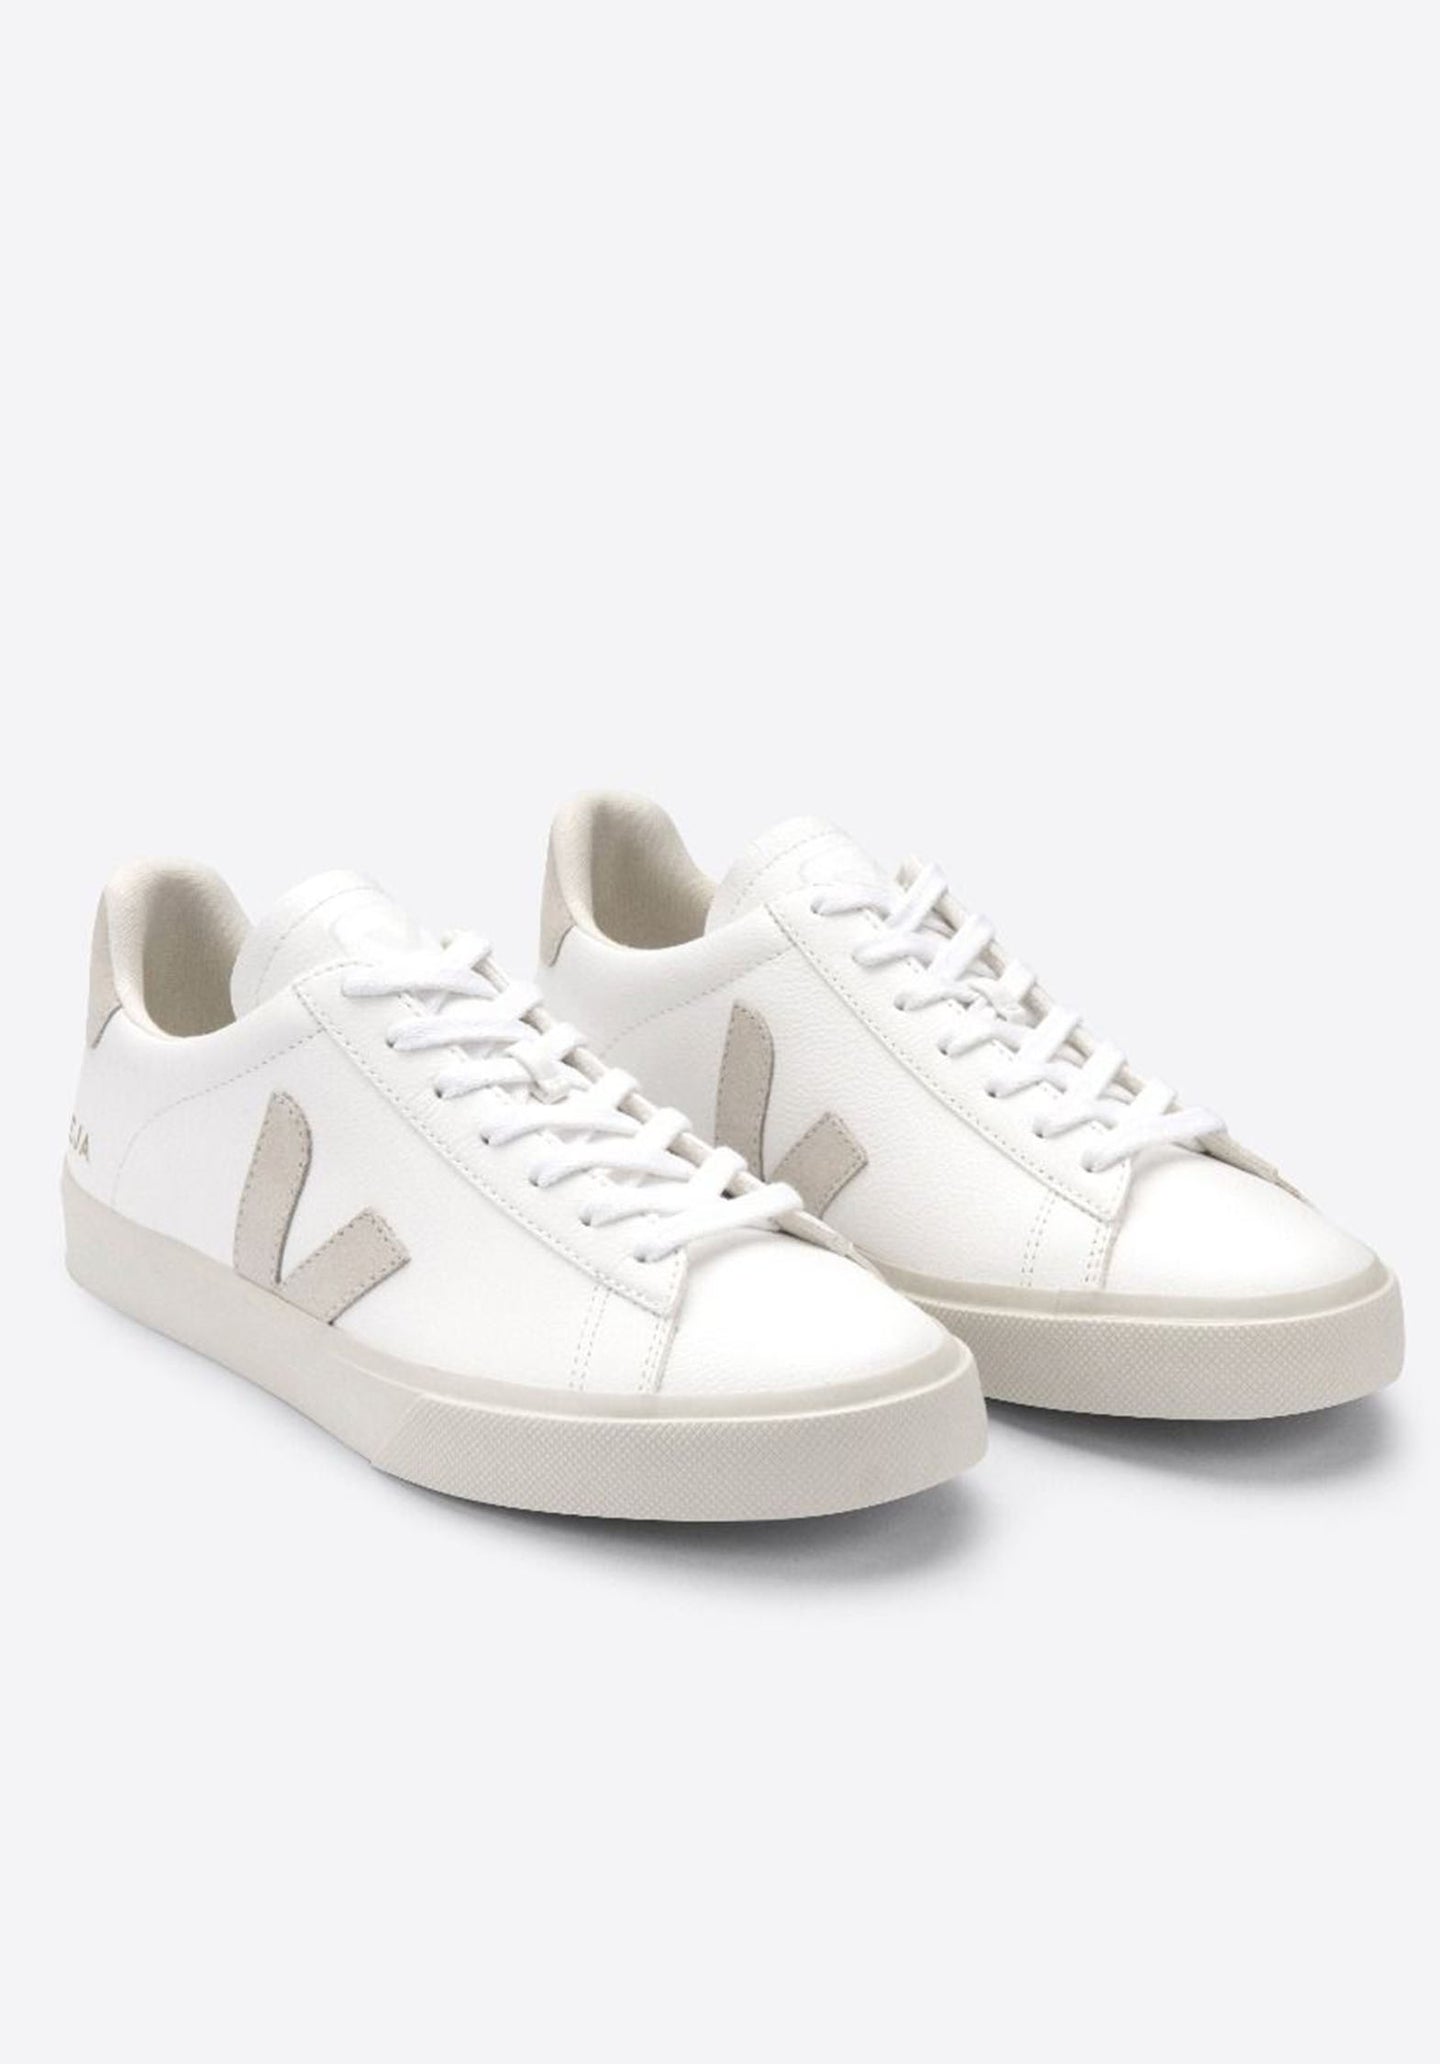 Veja eco-friendly shoes and Veja sneakers collection